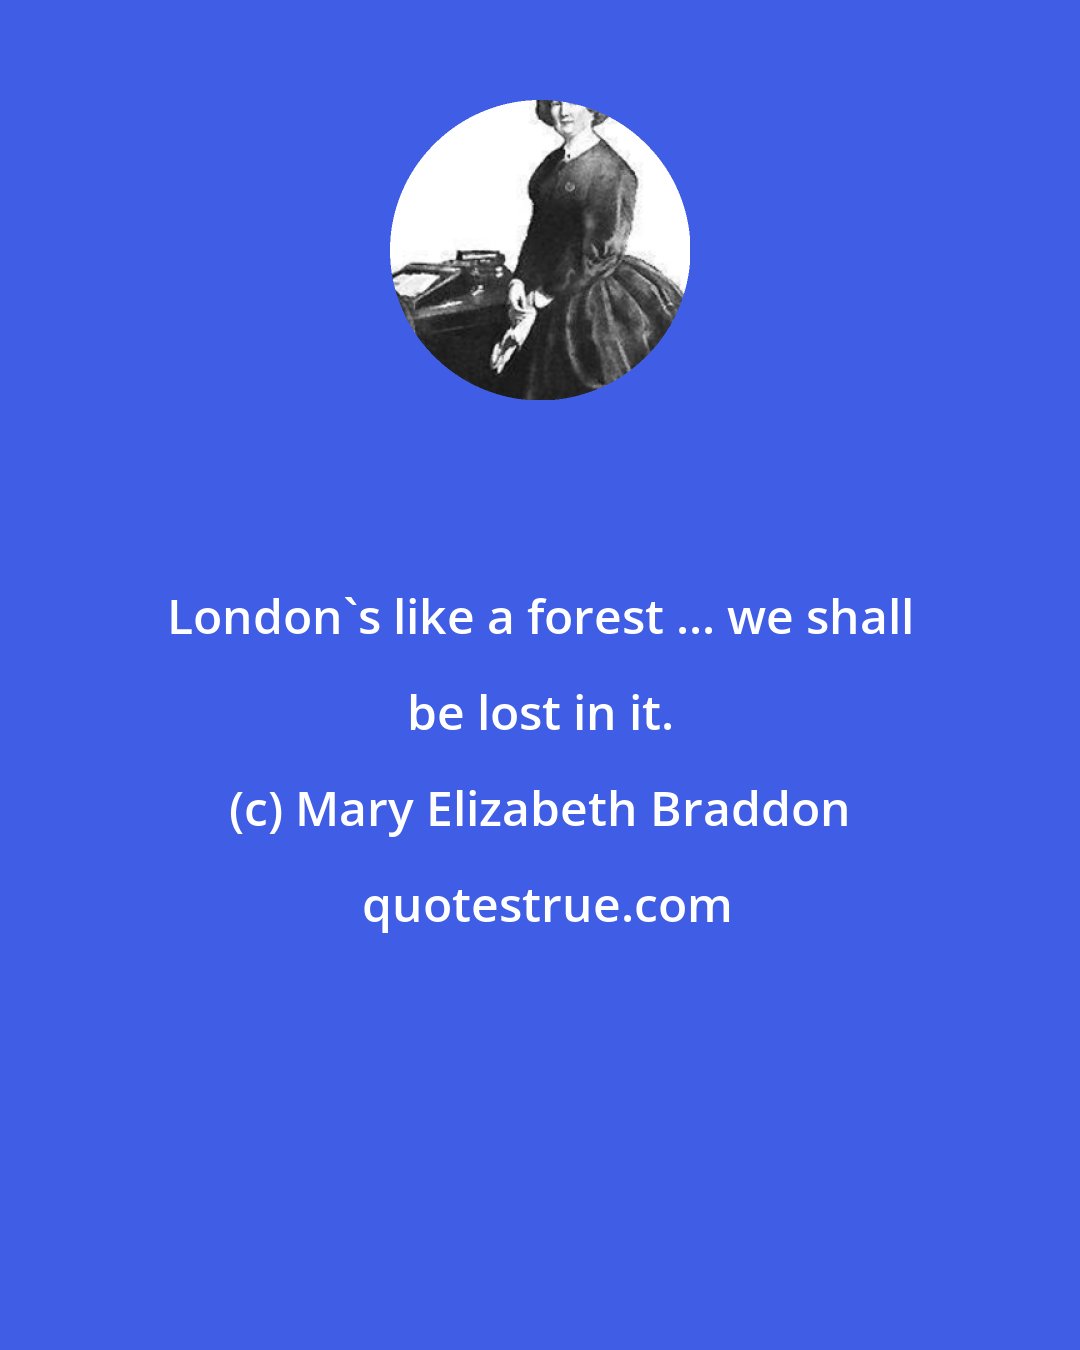 Mary Elizabeth Braddon: London's like a forest ... we shall be lost in it.